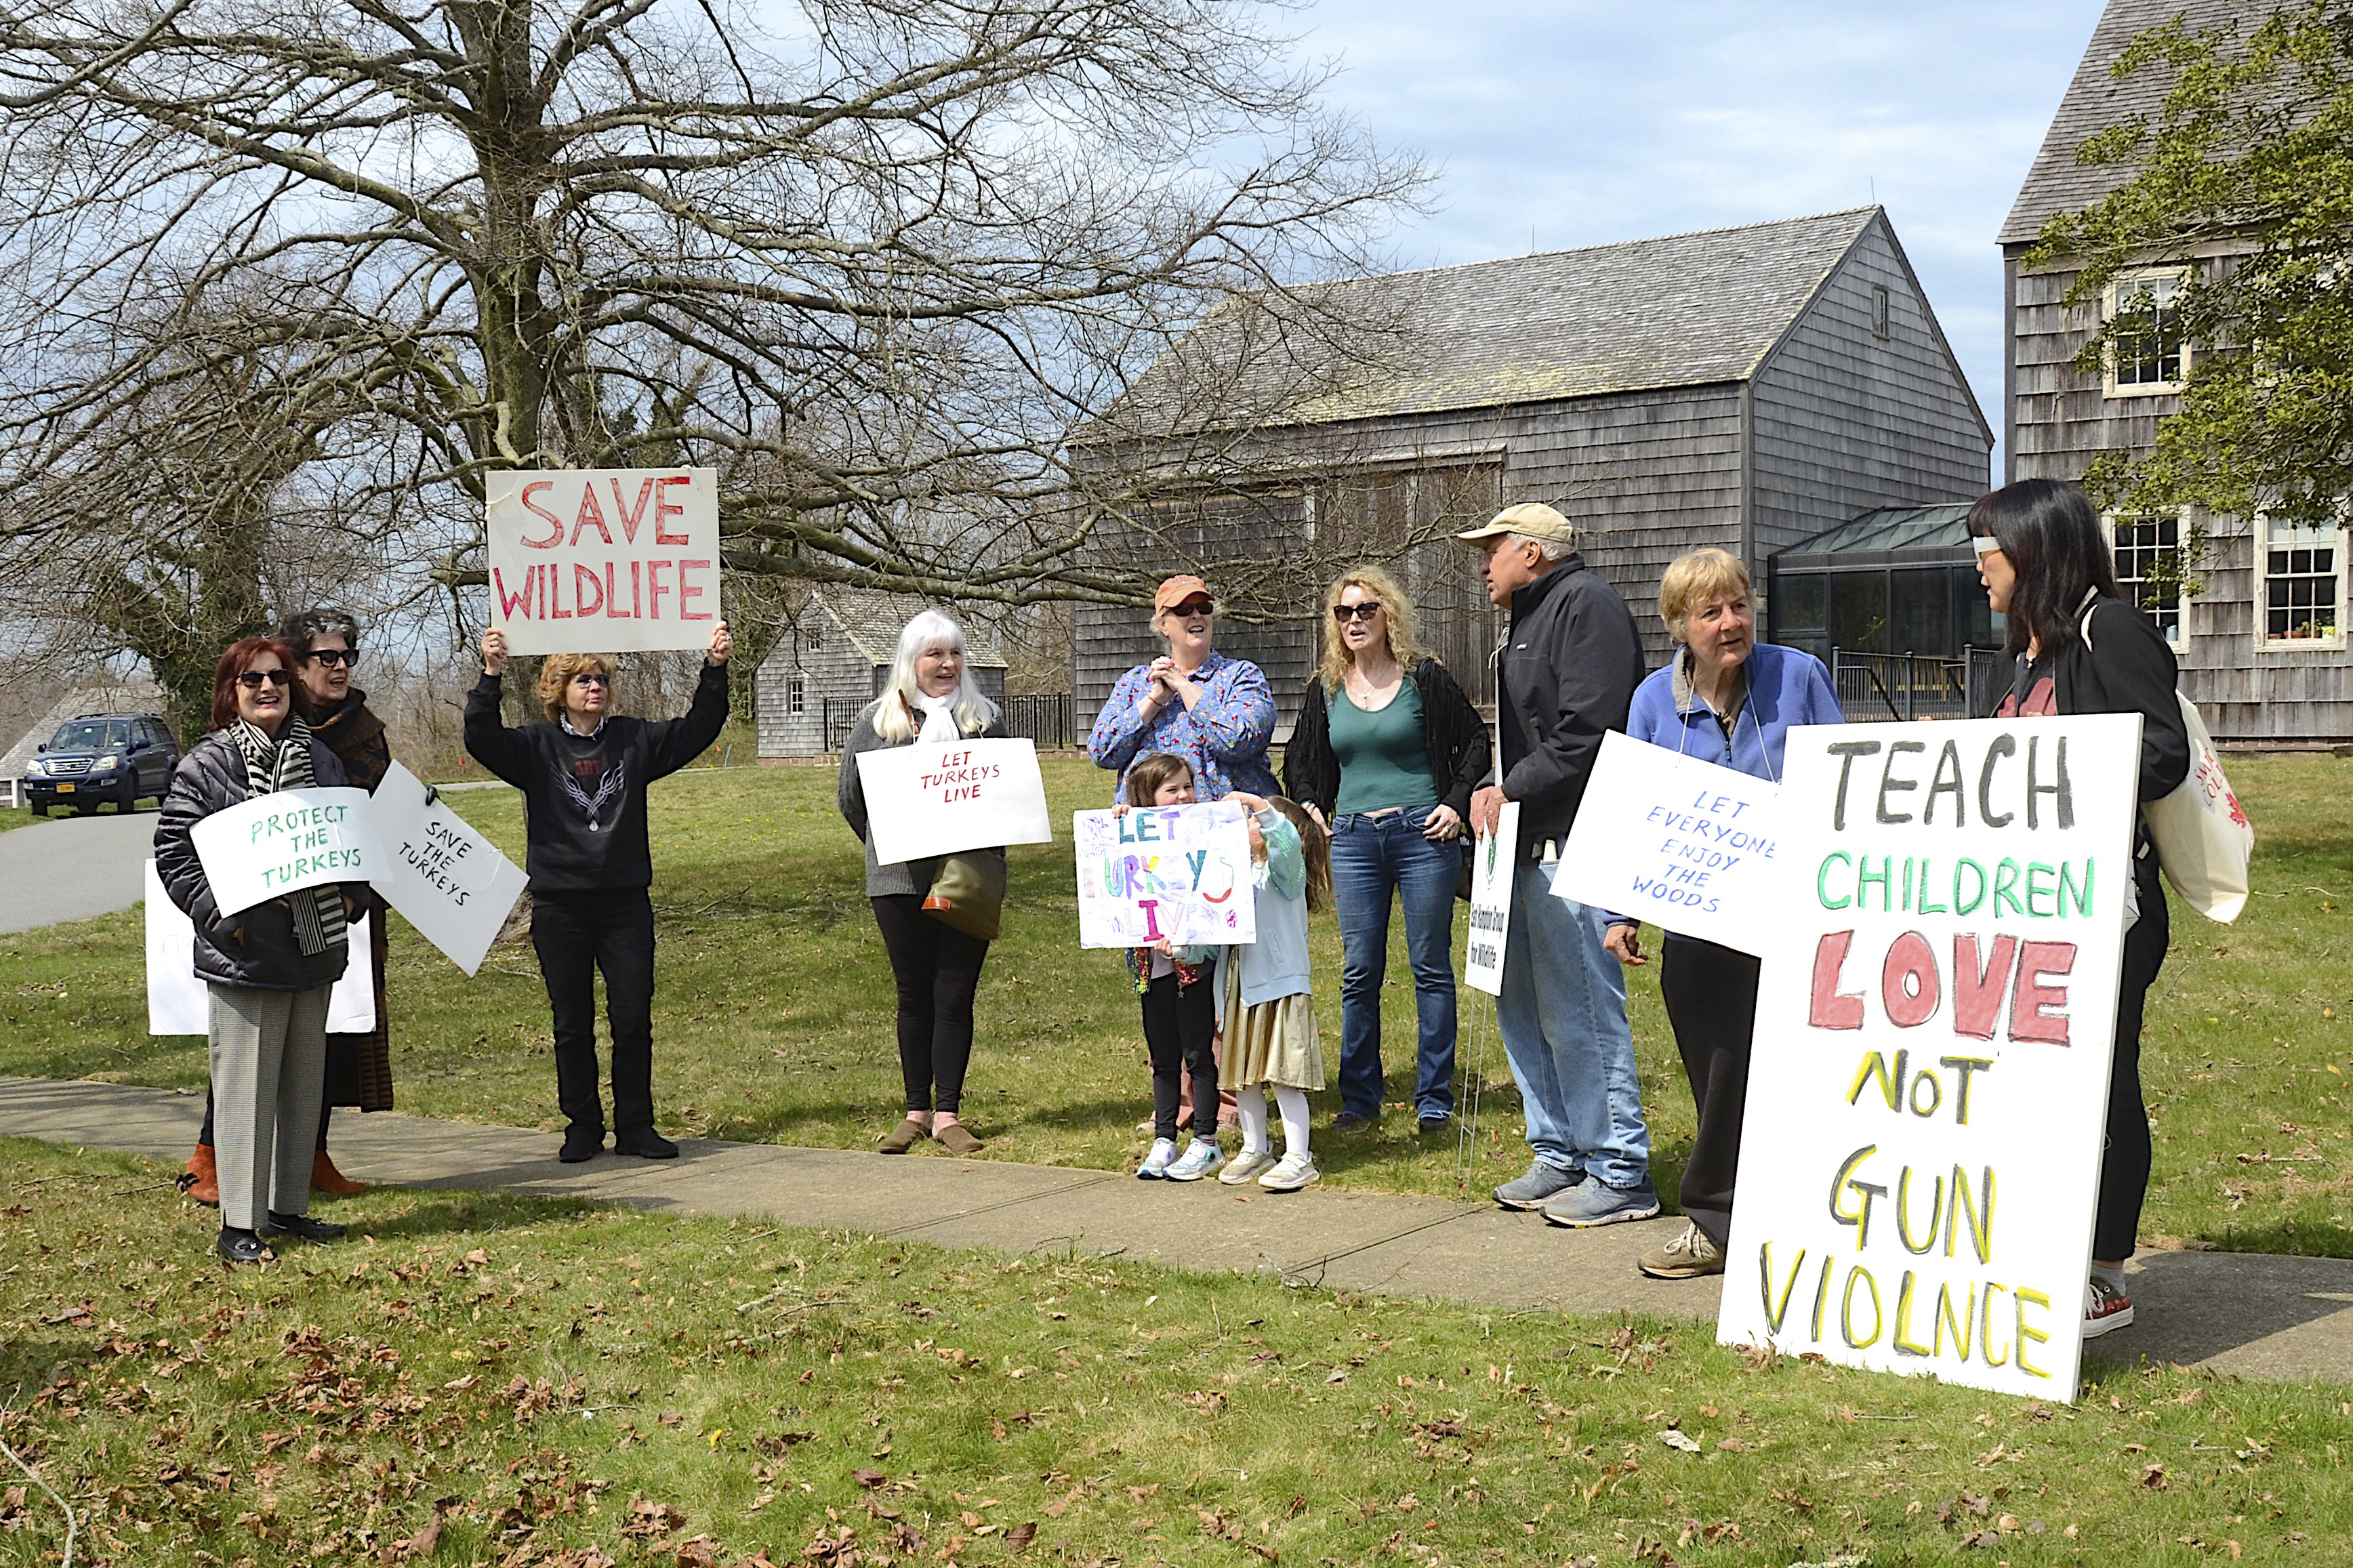 The demonstration hosted by the East Hampton Group for Wildlife opposing the addition of a turkey hunting season in May was held in front of Town Hall prior to the meeting on April 6.  KYRIL BROMLEY